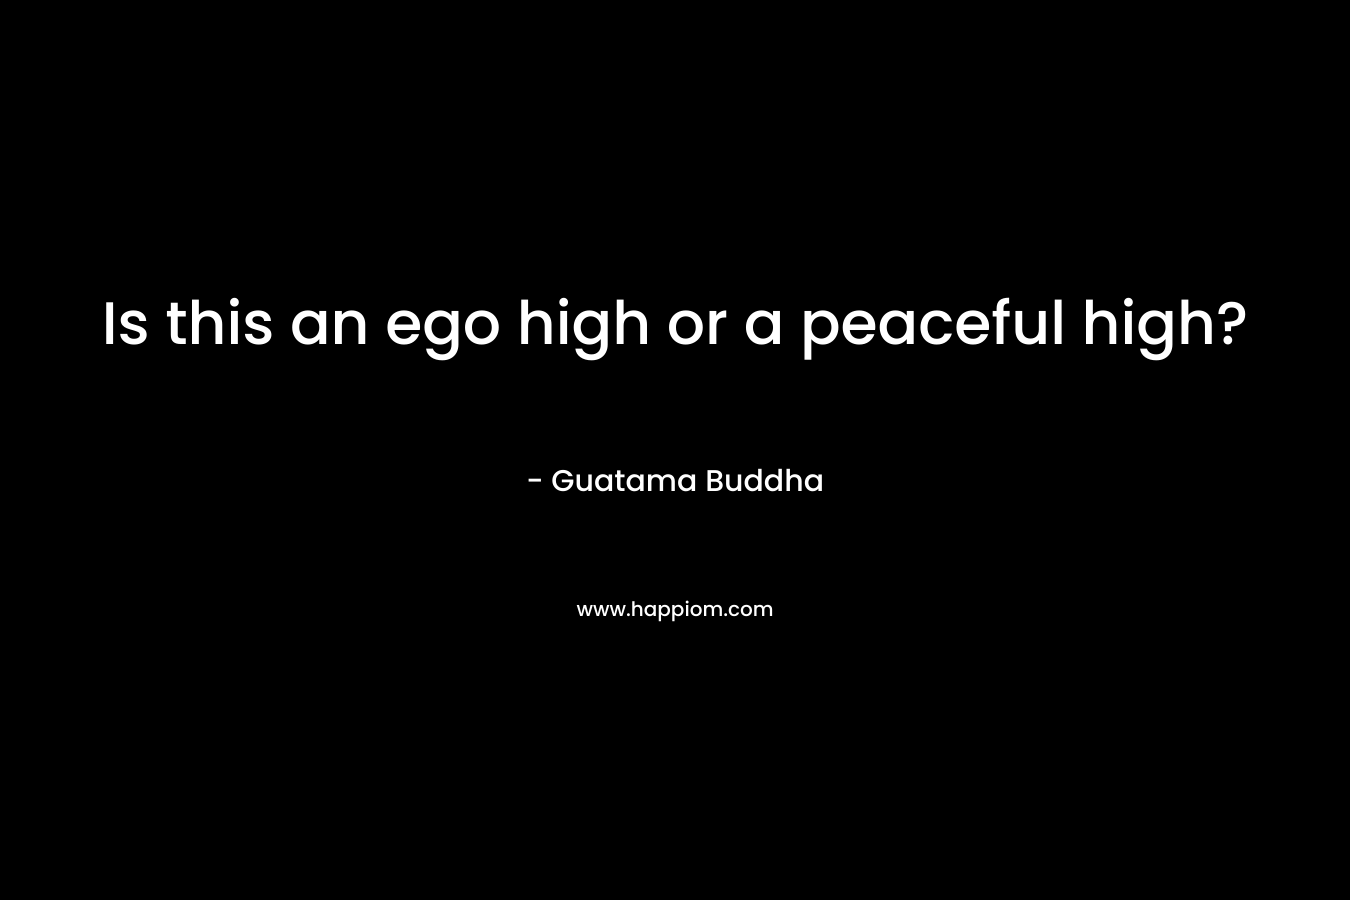 Is this an ego high or a peaceful high?